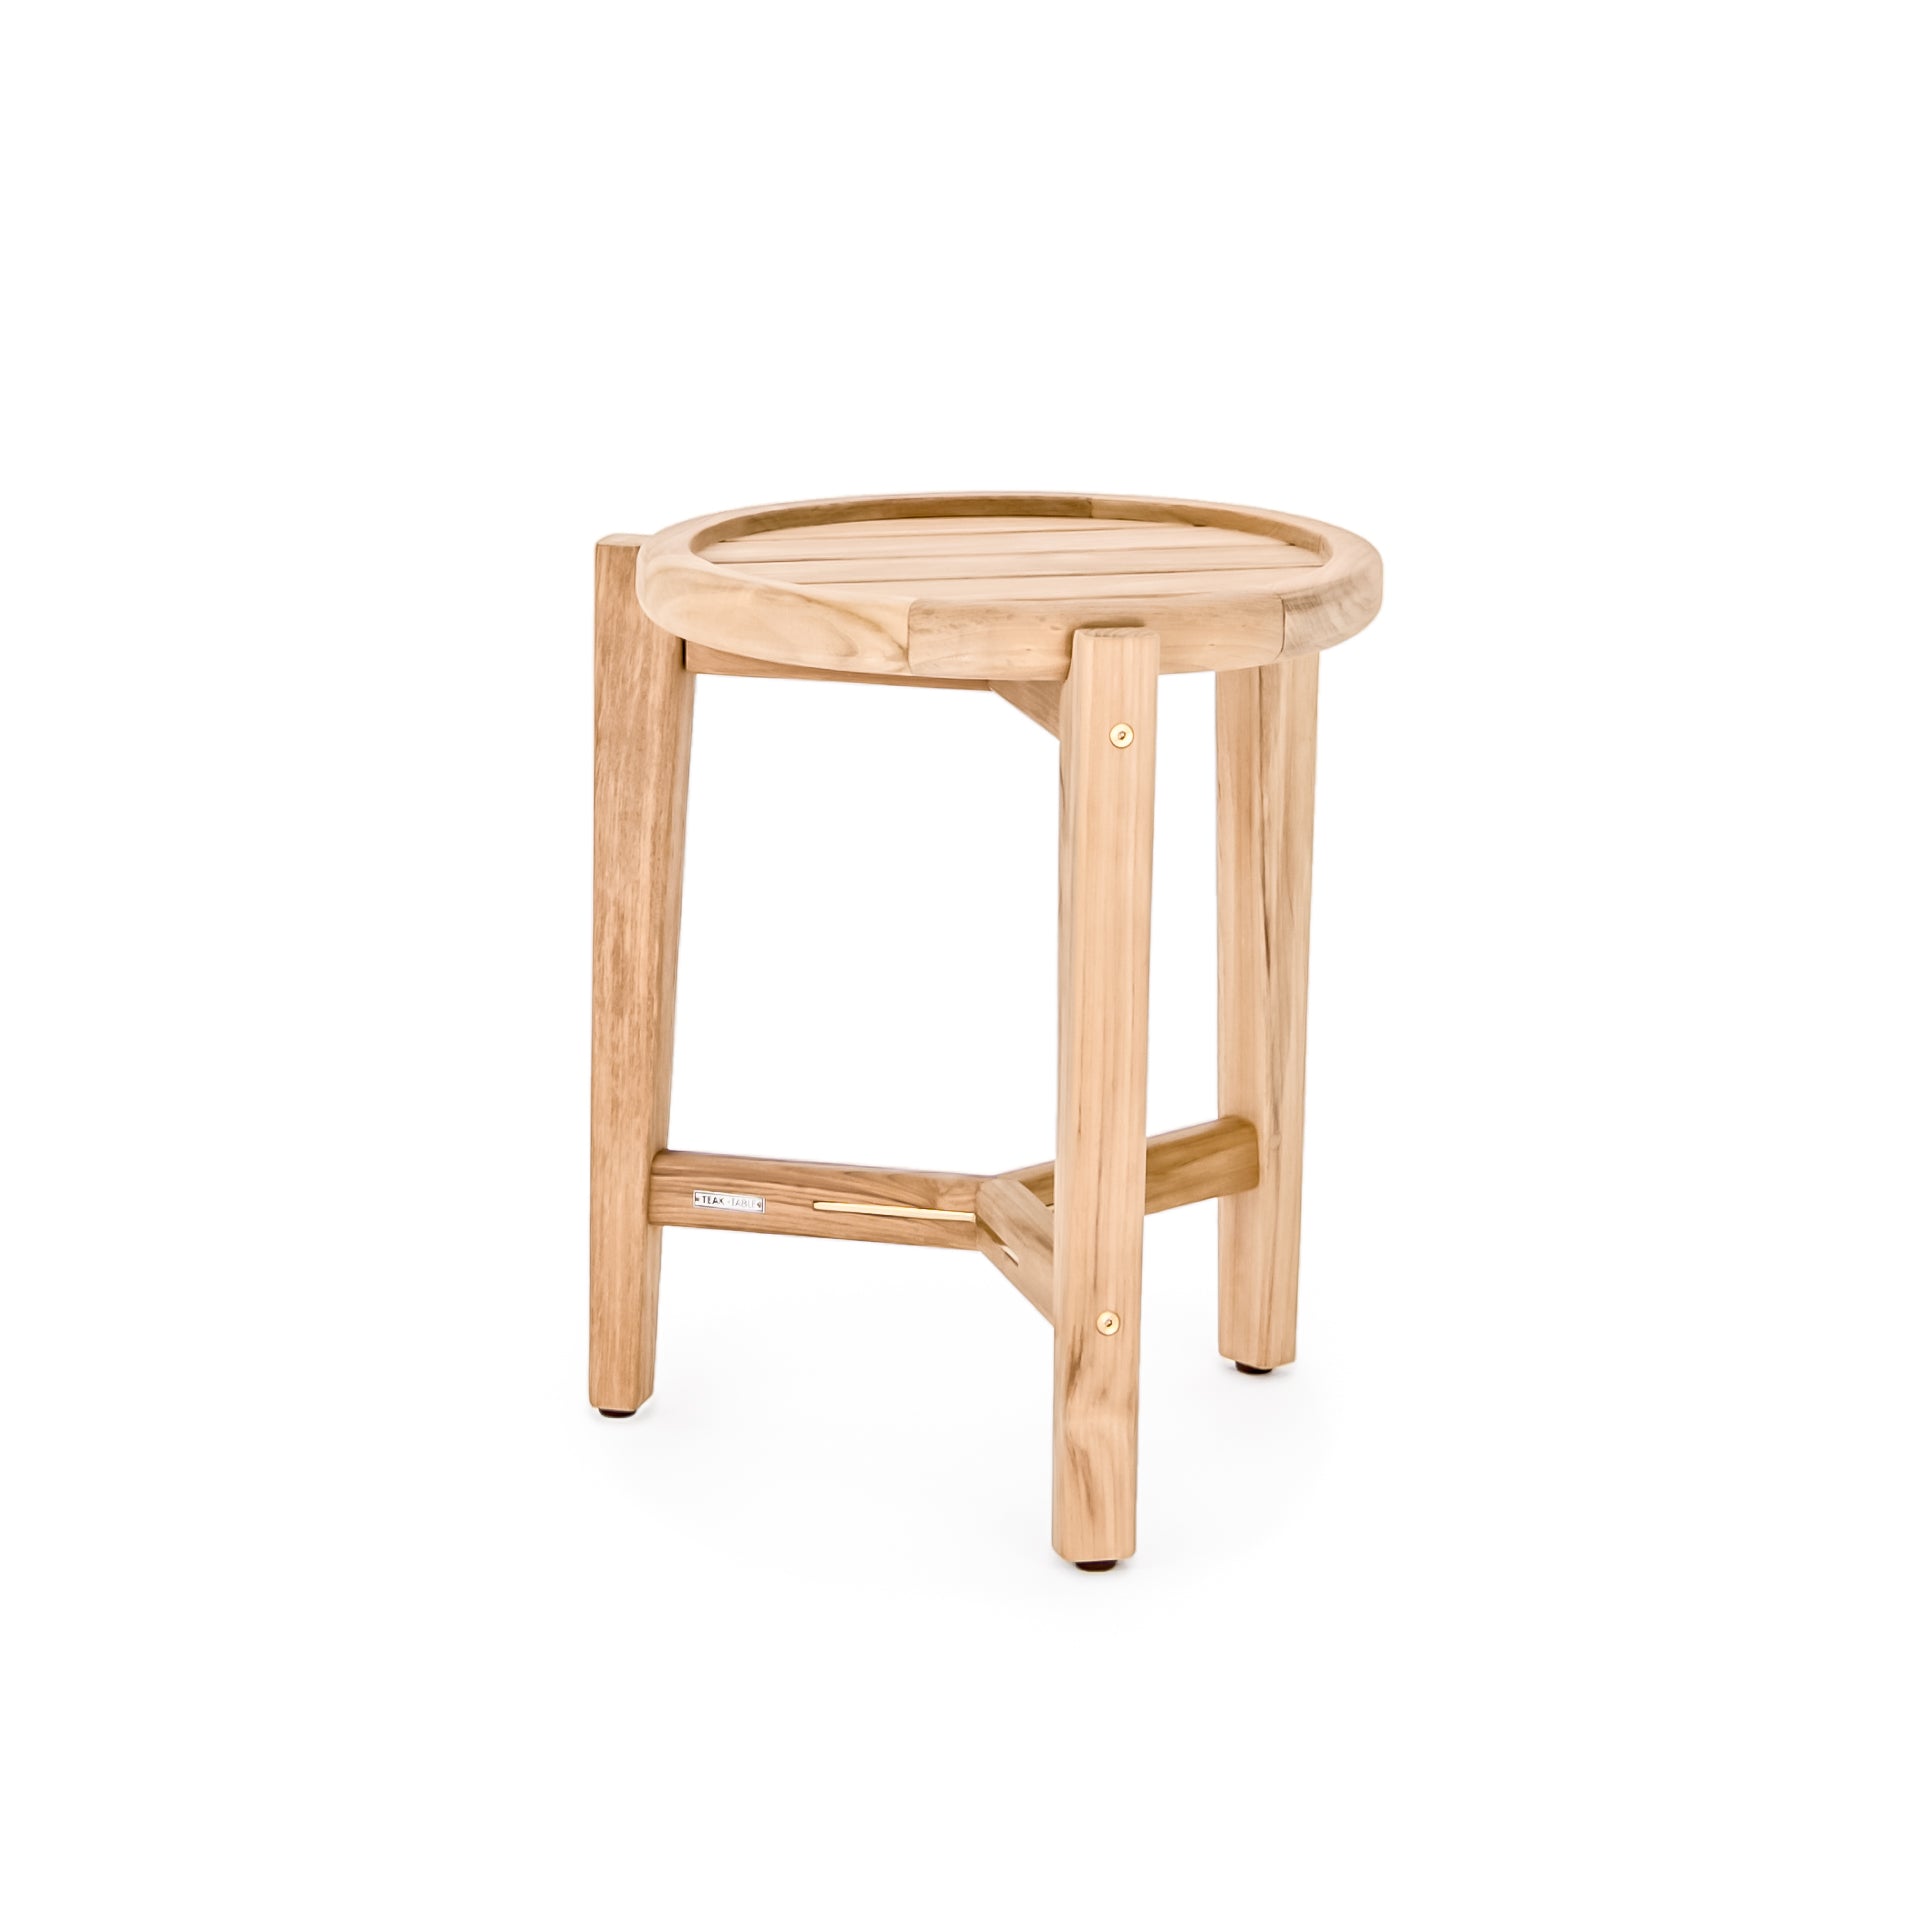 Atlantic Side Table - Round